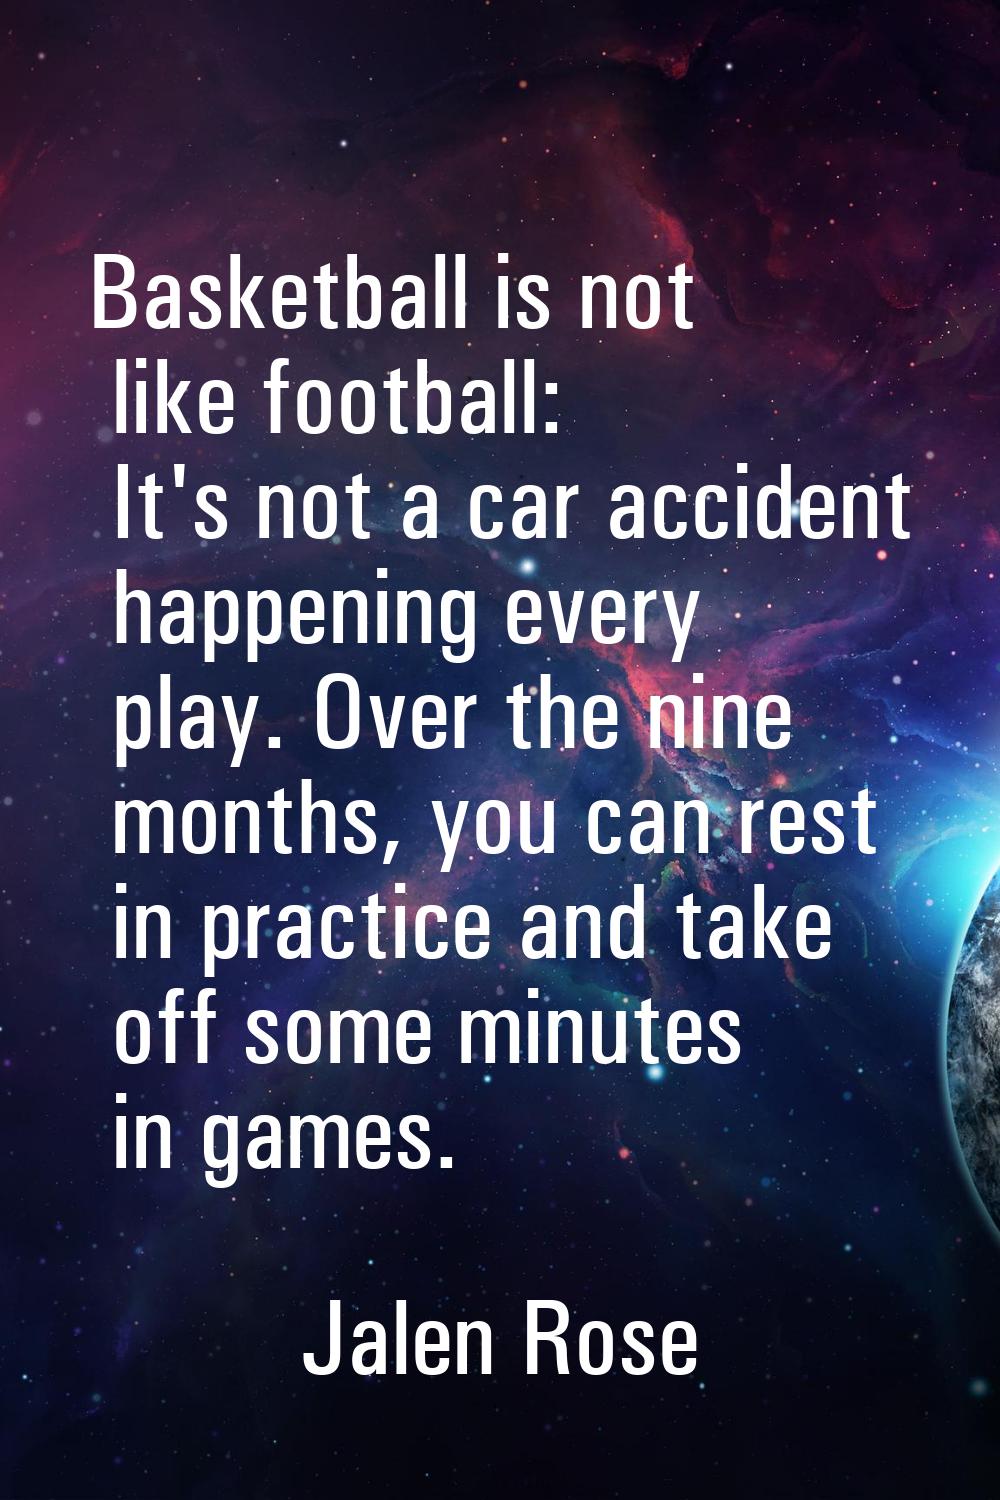 Basketball is not like football: It's not a car accident happening every play. Over the nine months